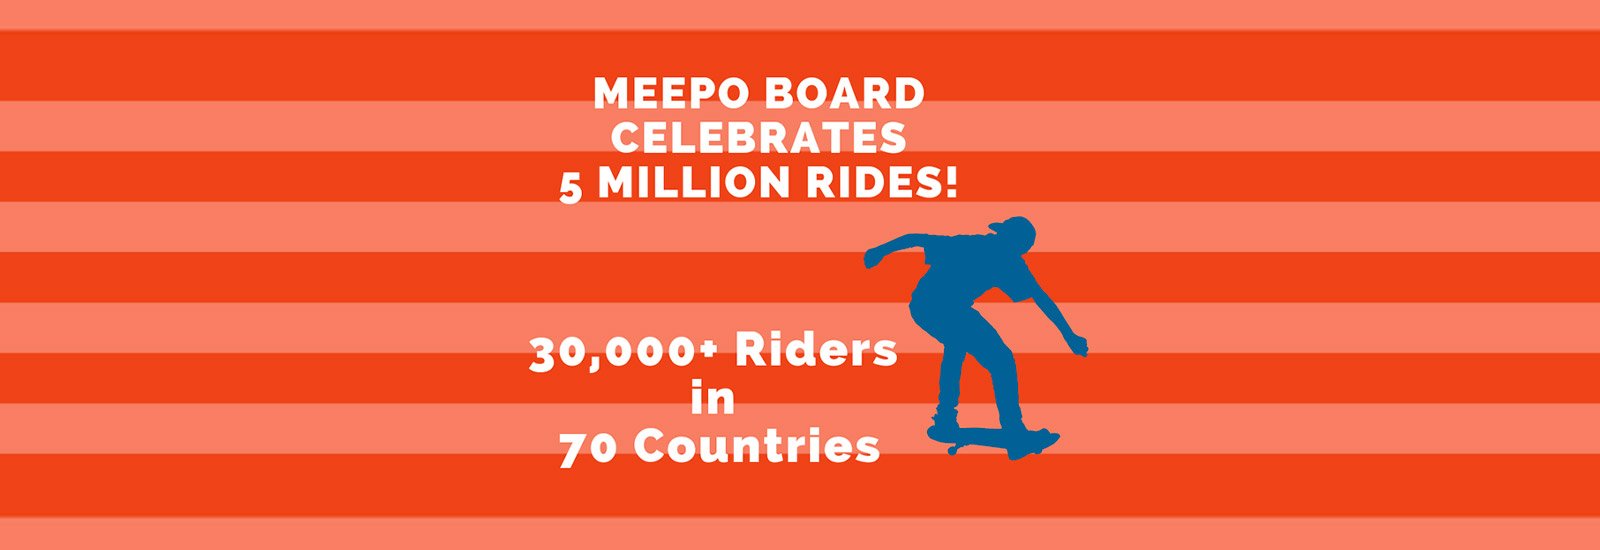 Thank you for riding 5 million rides!